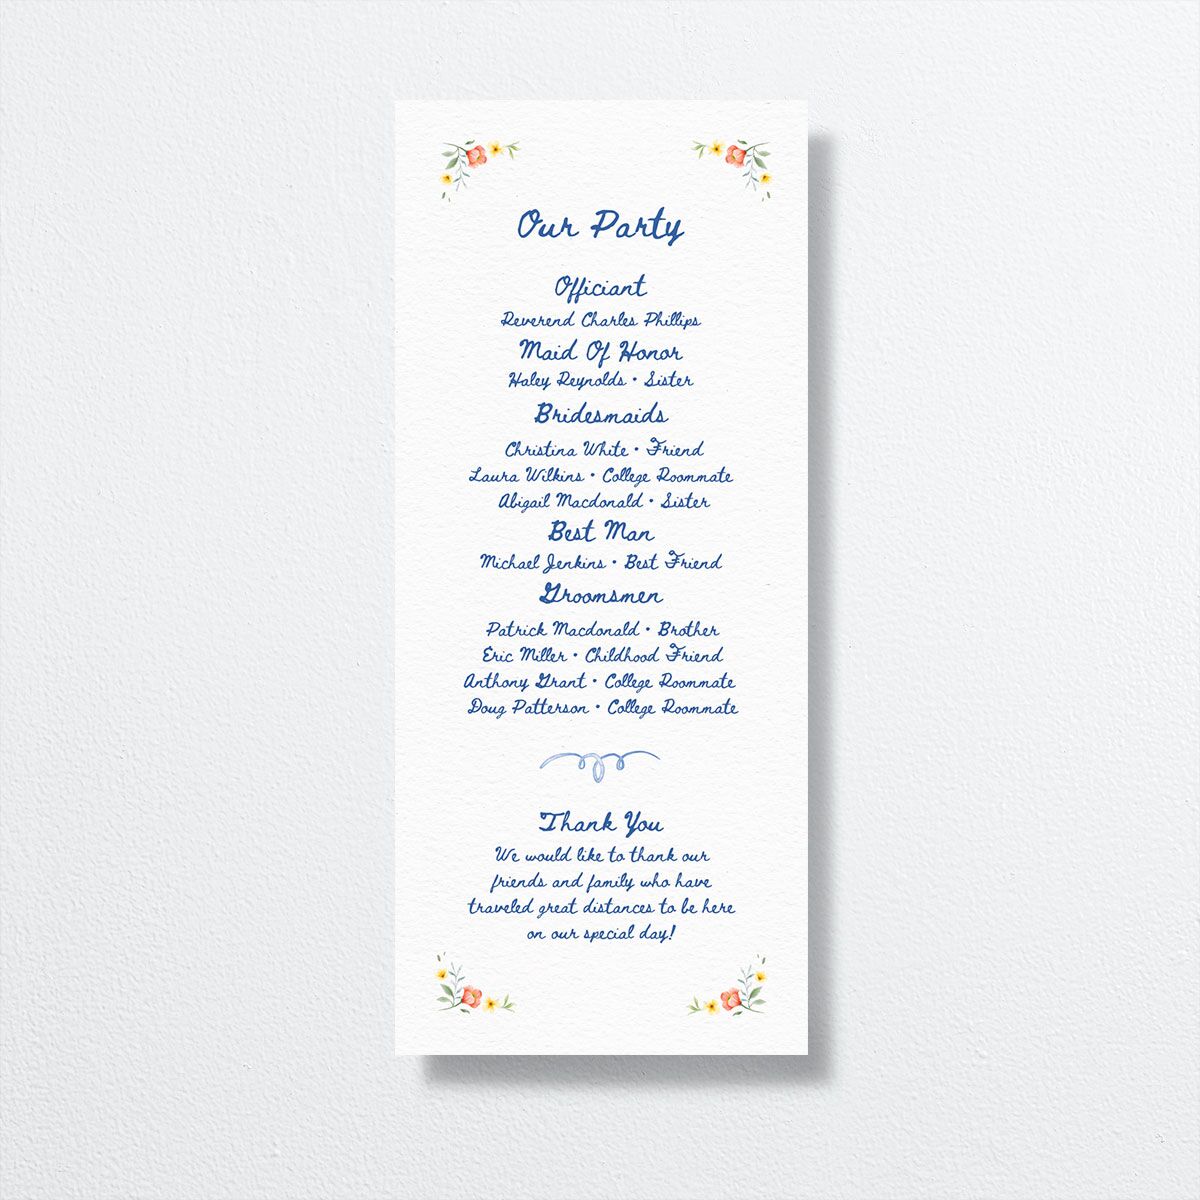 Countryside Crest Wedding Programs back in blue